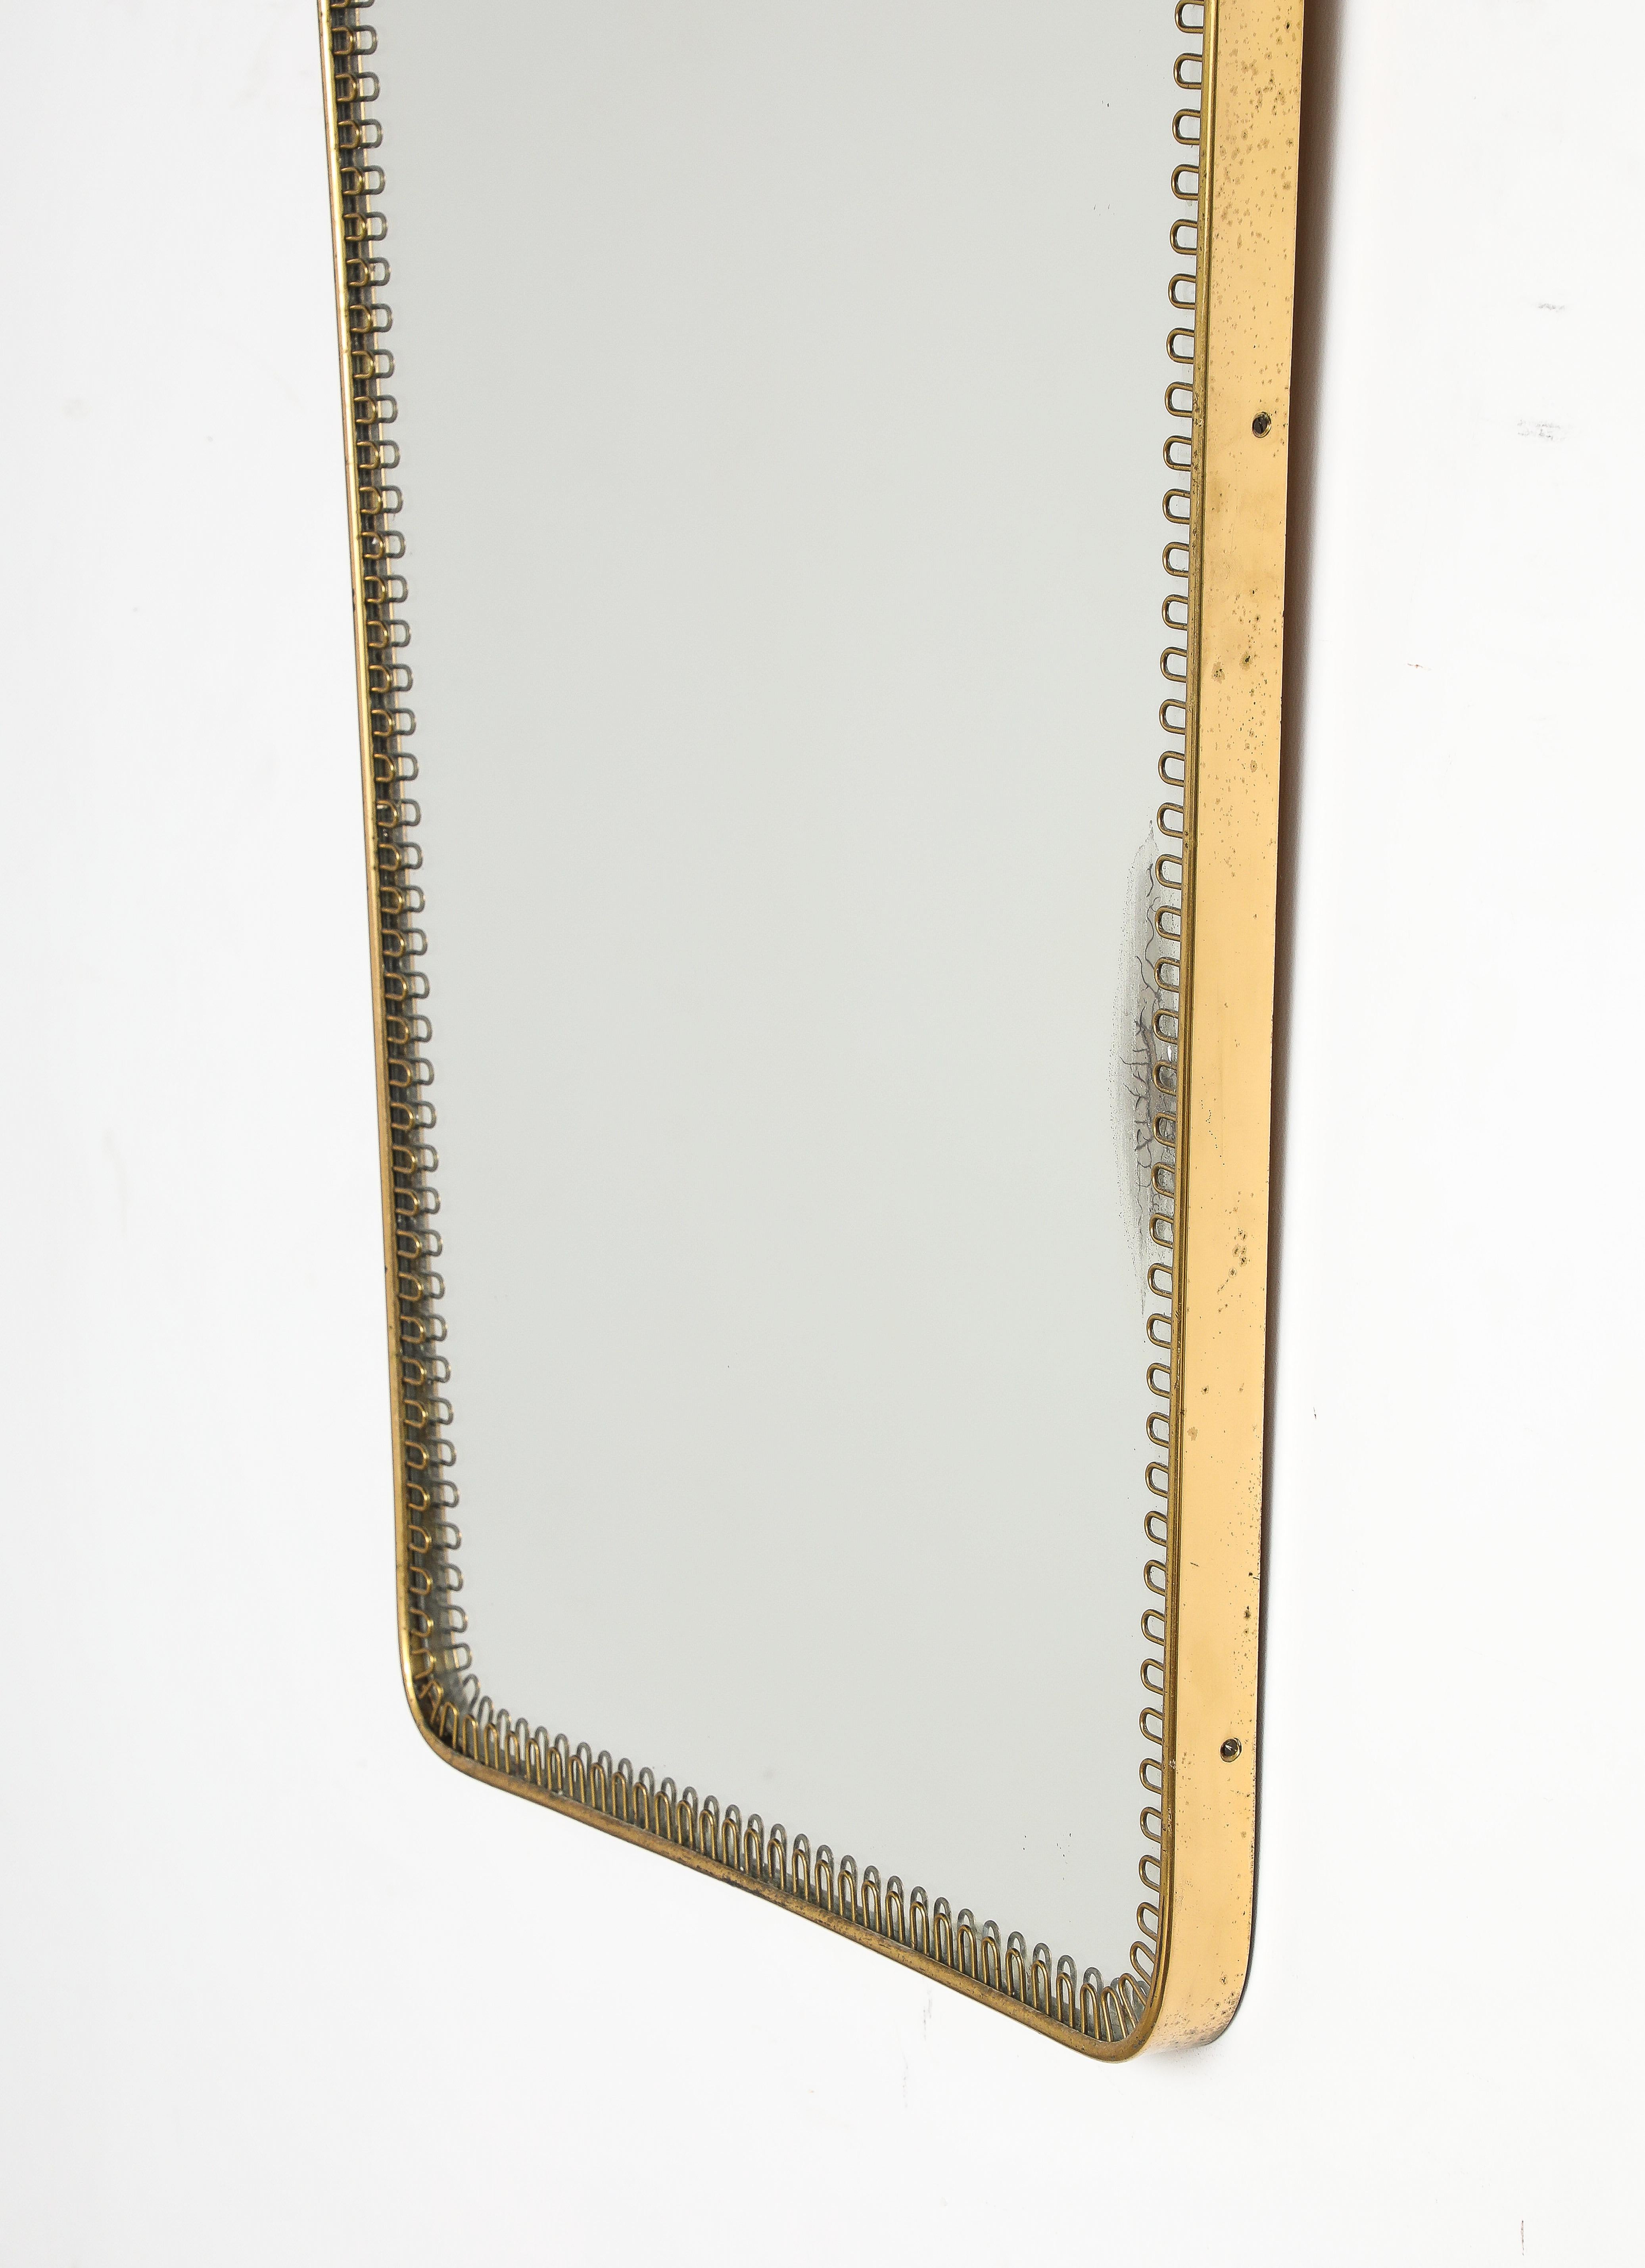 Gio Ponti Attributed Italian Modernist Brass Framed Mirror, Italy, circa 1940 In Good Condition For Sale In New York, NY